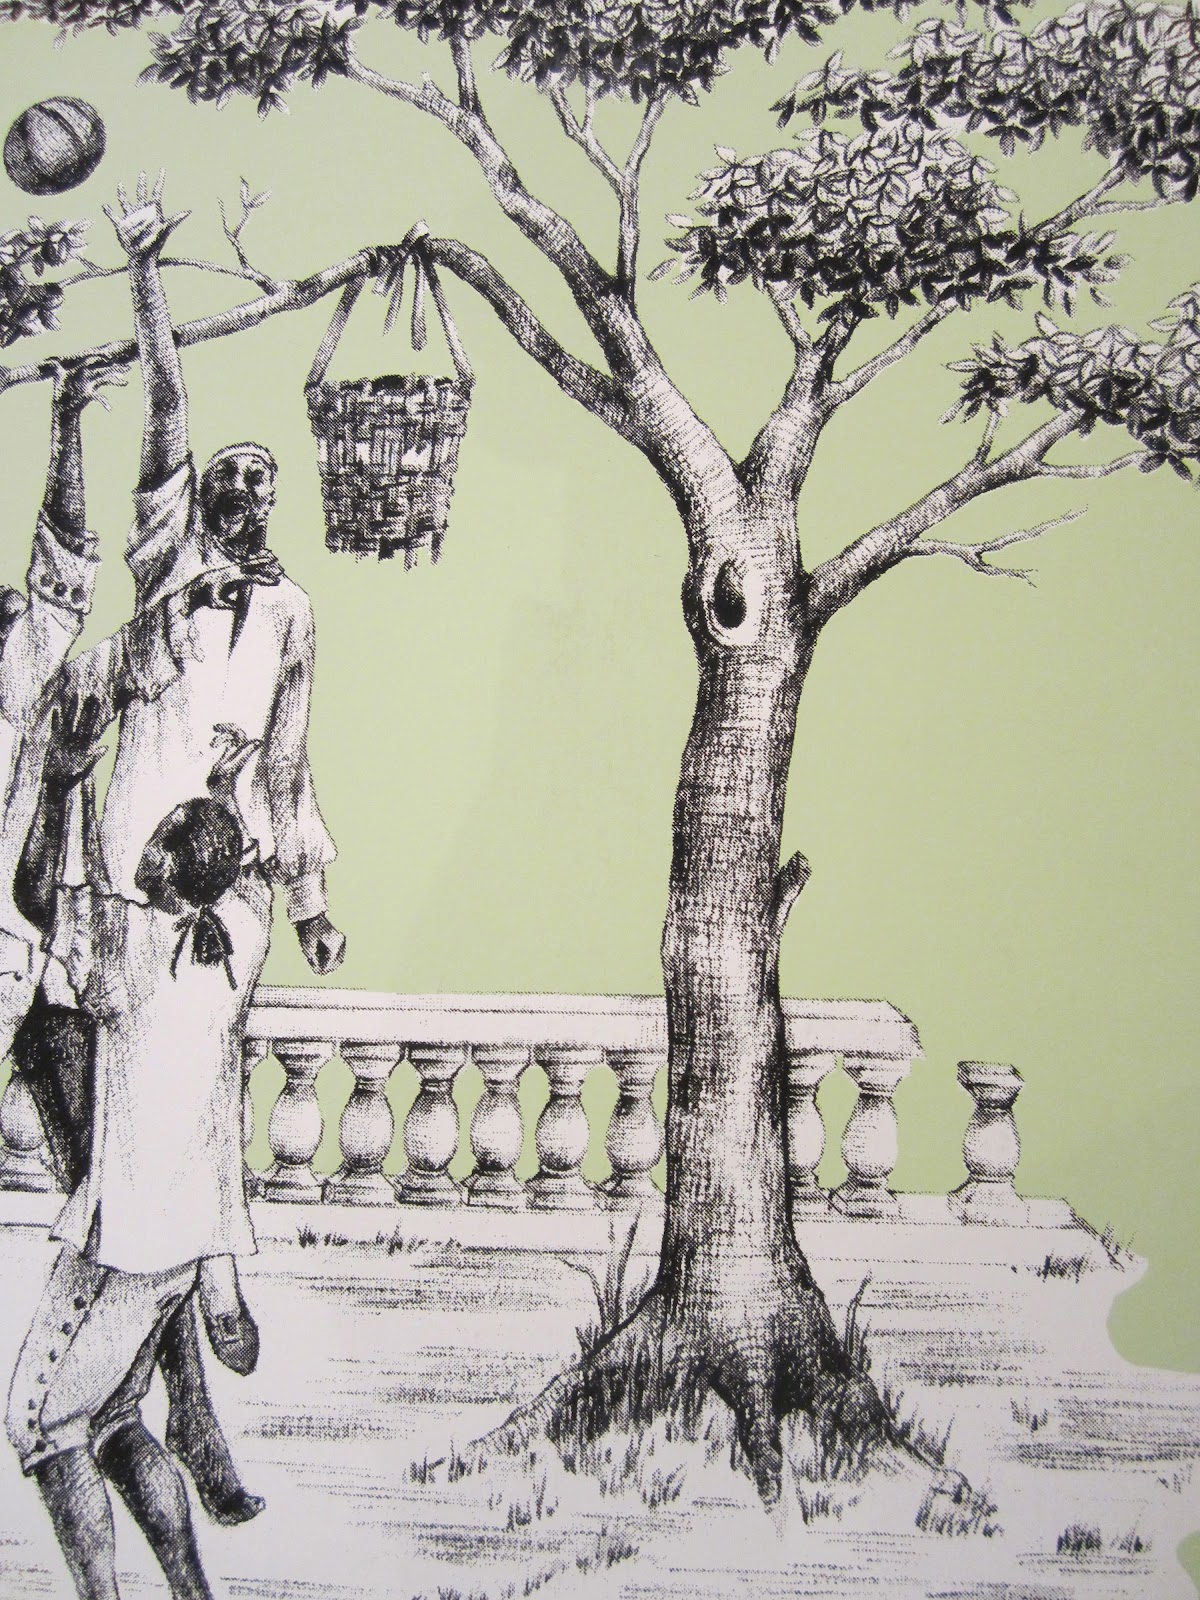 Toile de Jouy by way of Harlem | the paper trail